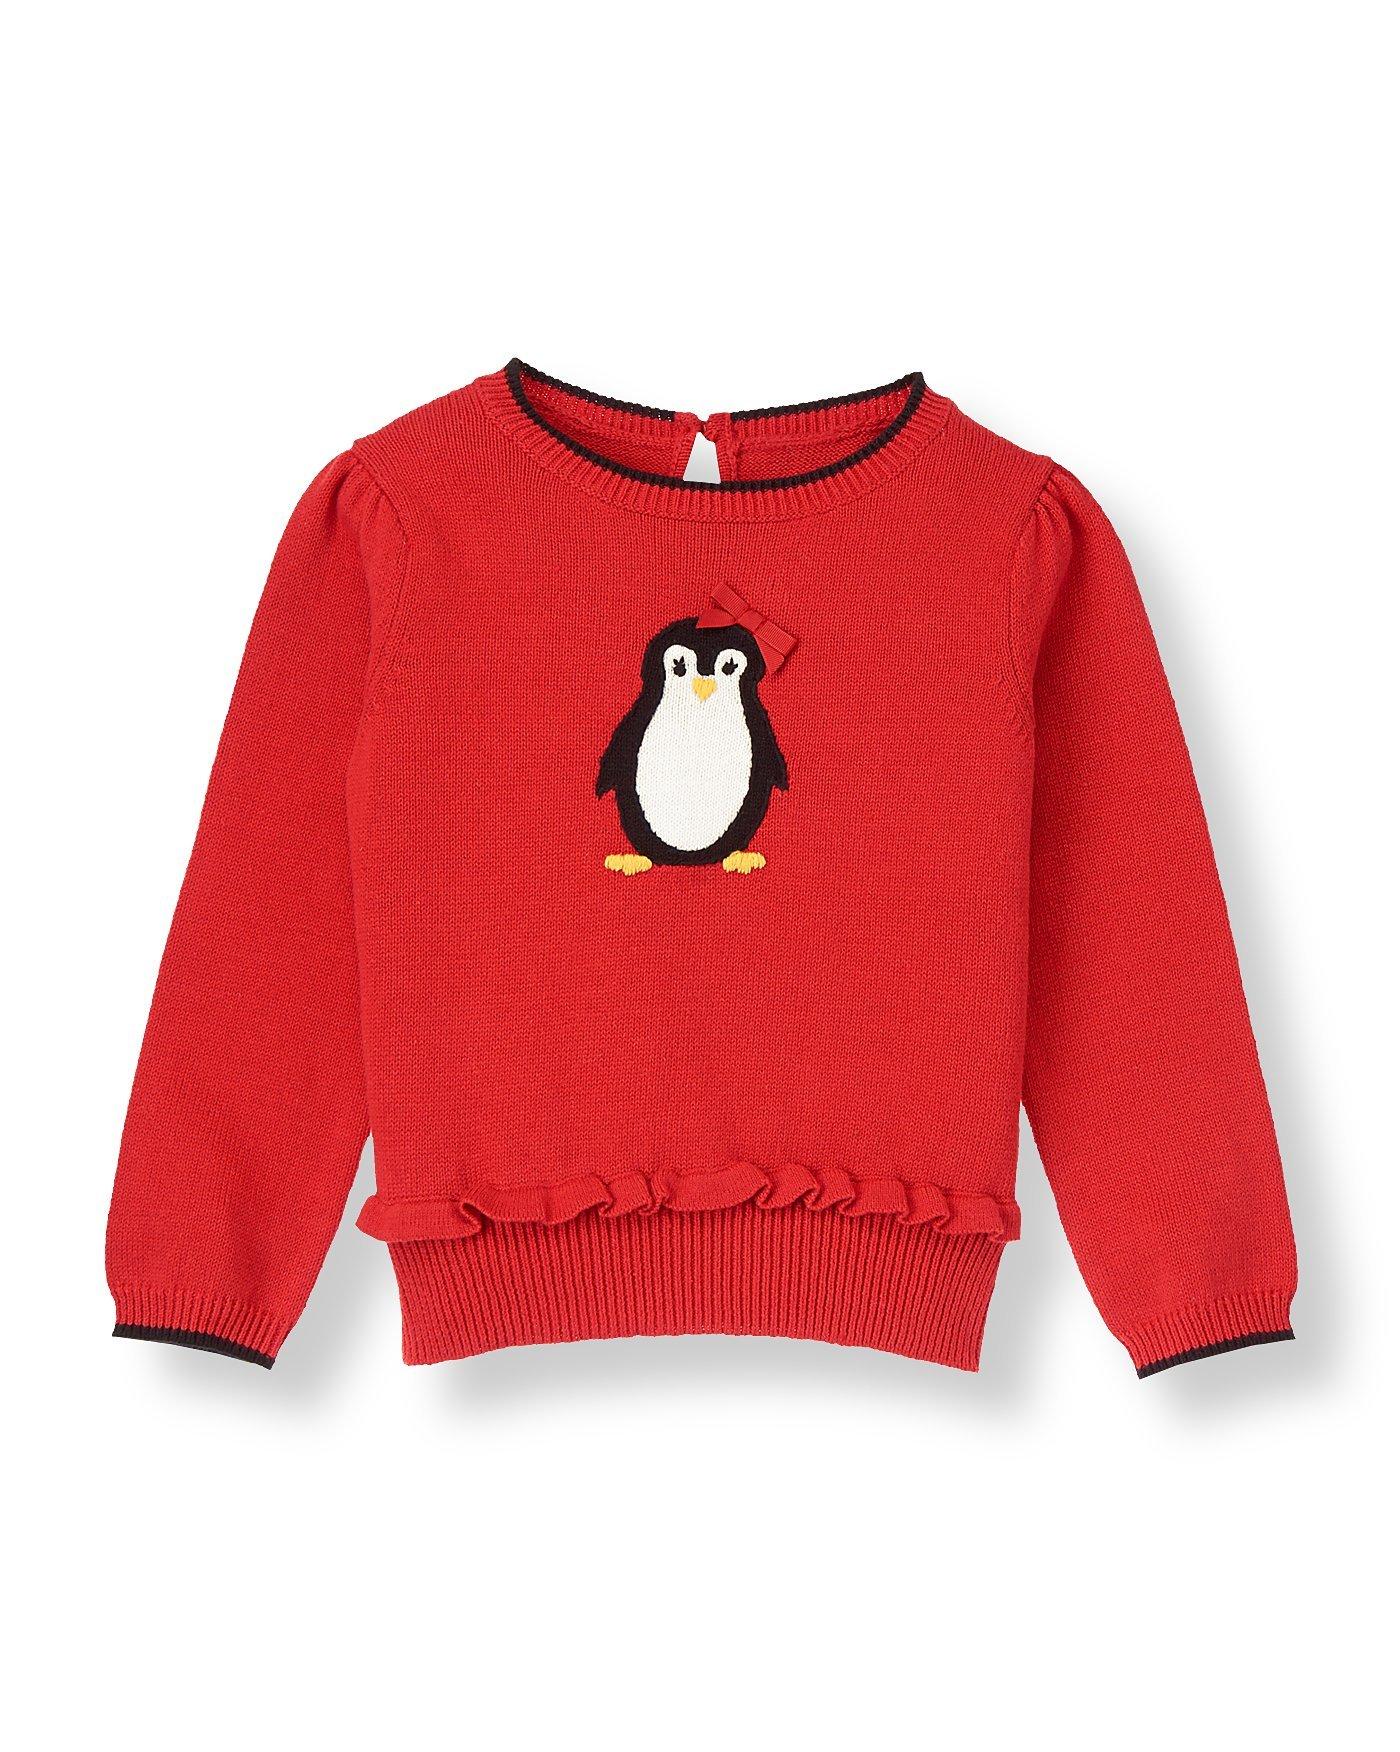 Bow Penguin Sweater image number 0